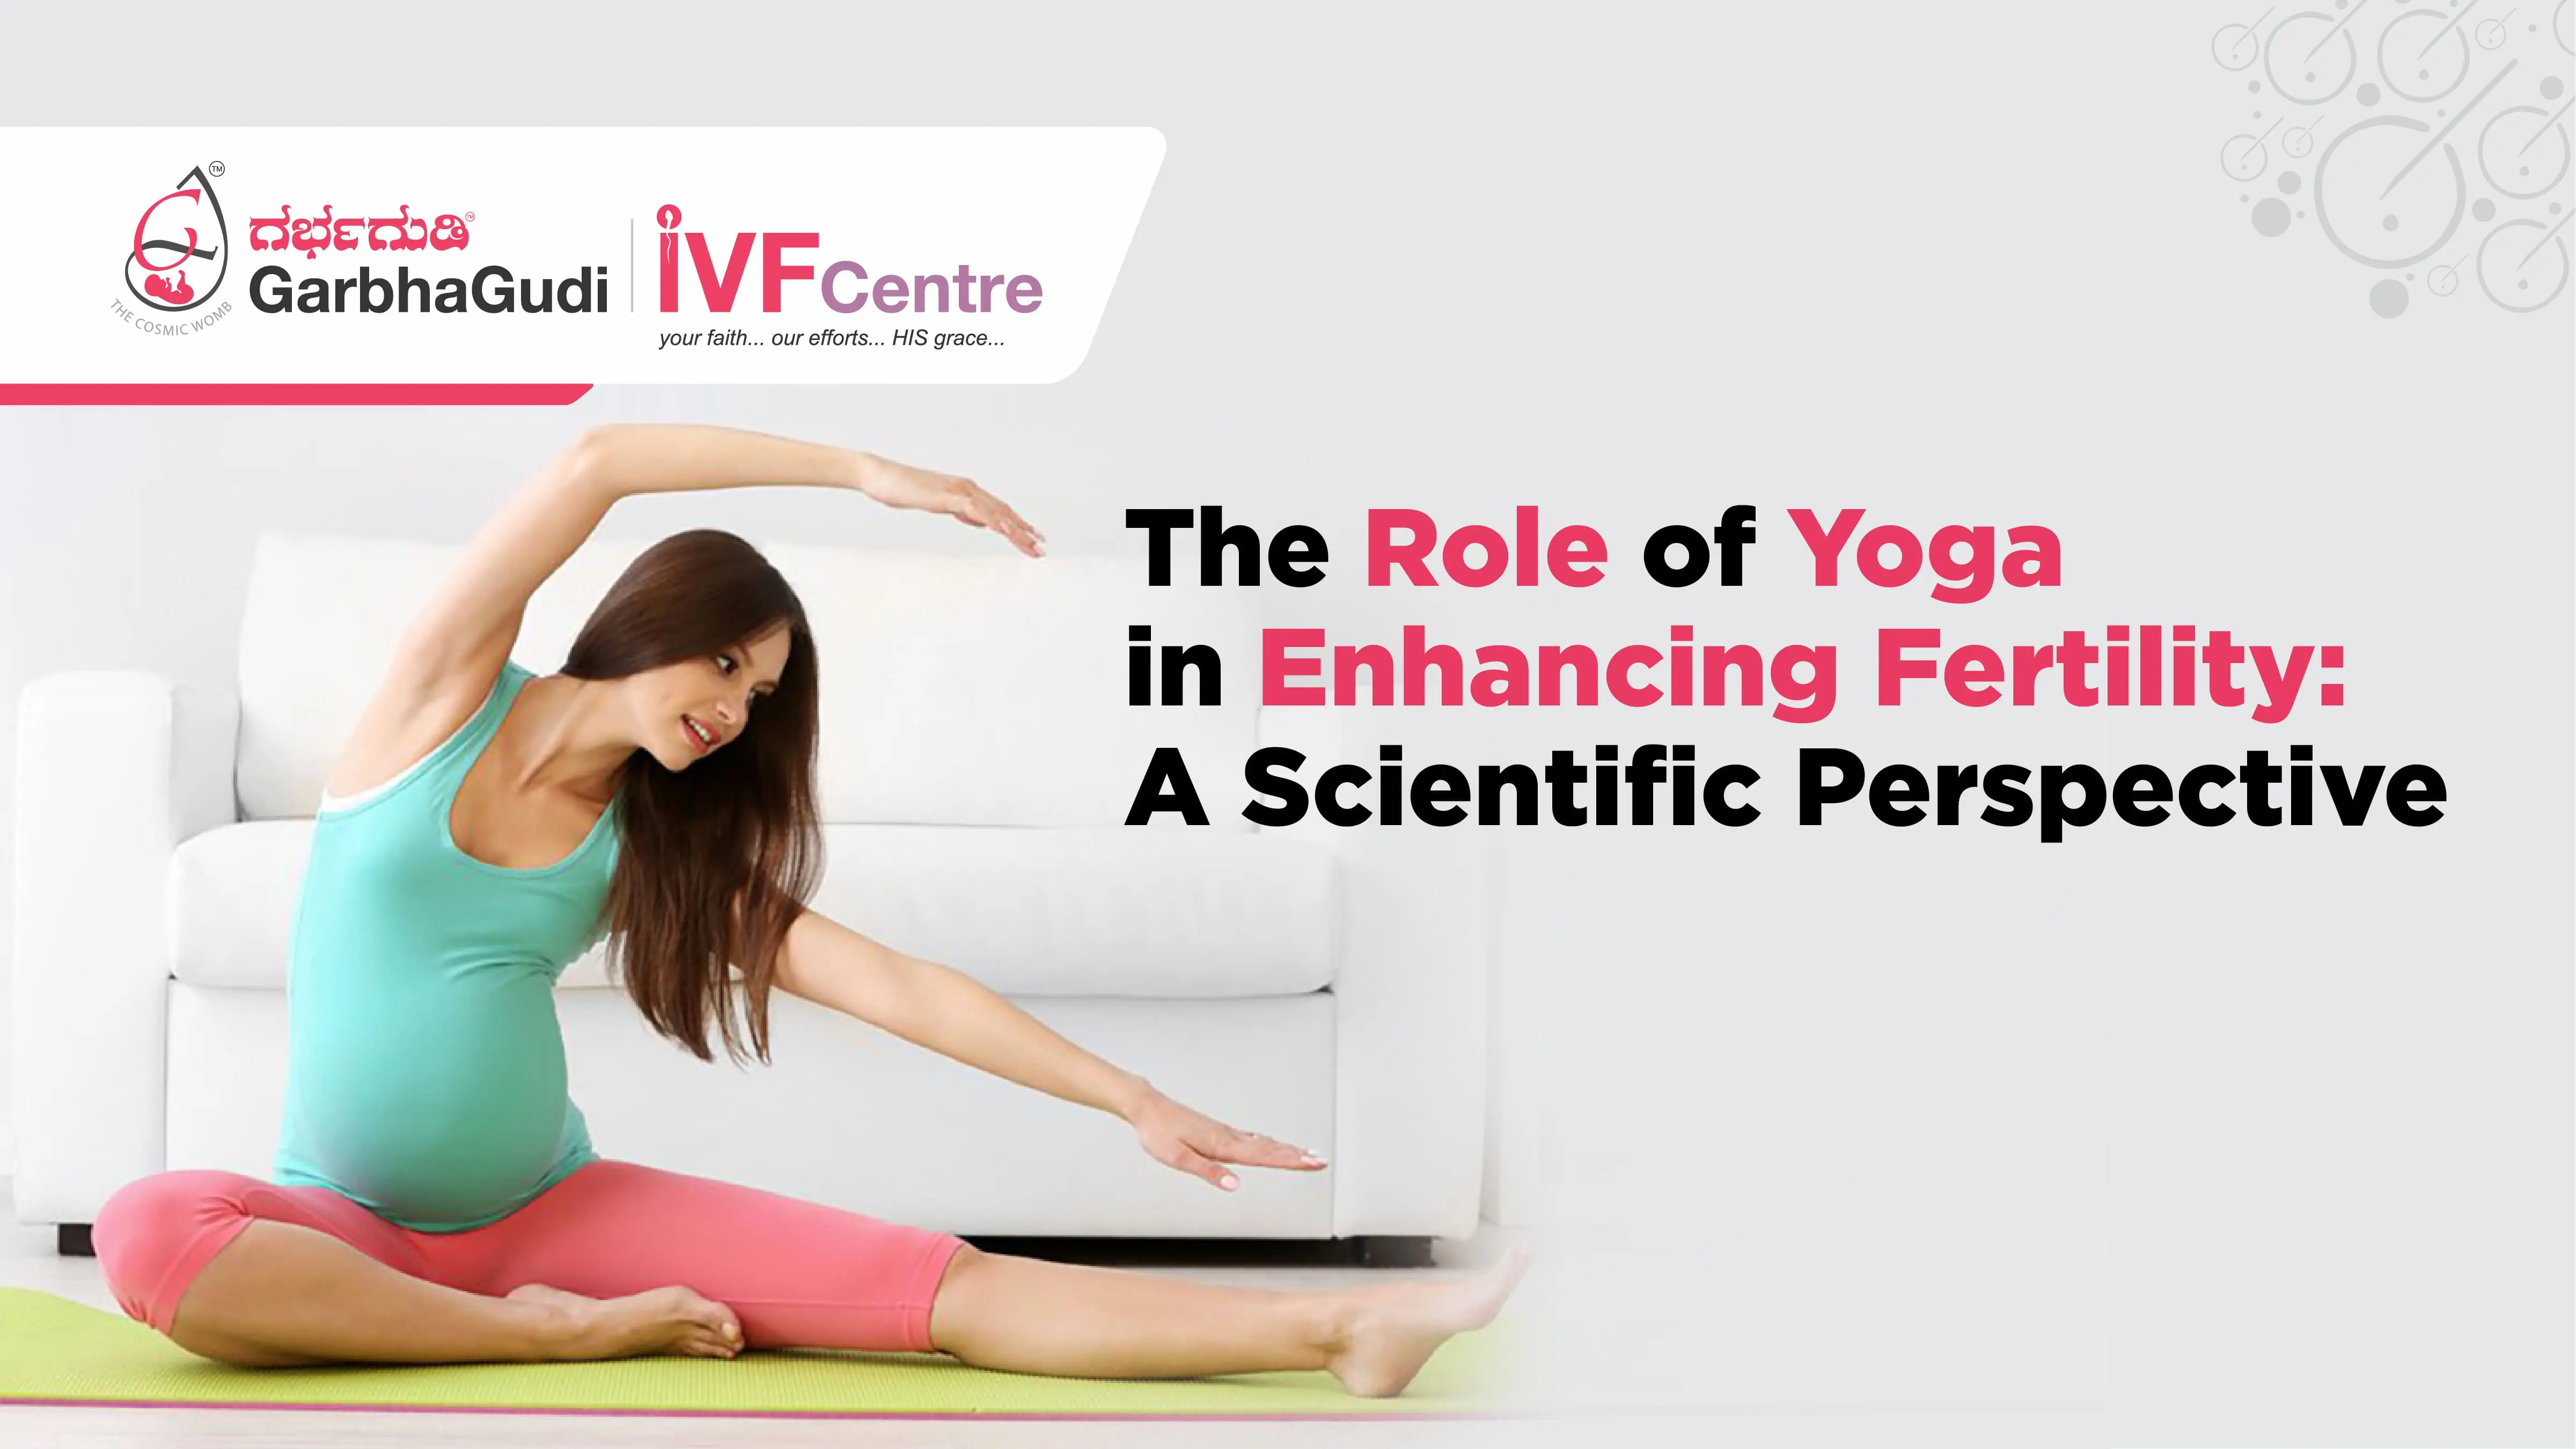 The Role of Yoga in Enhancing Fertility: A Scientific Perspective